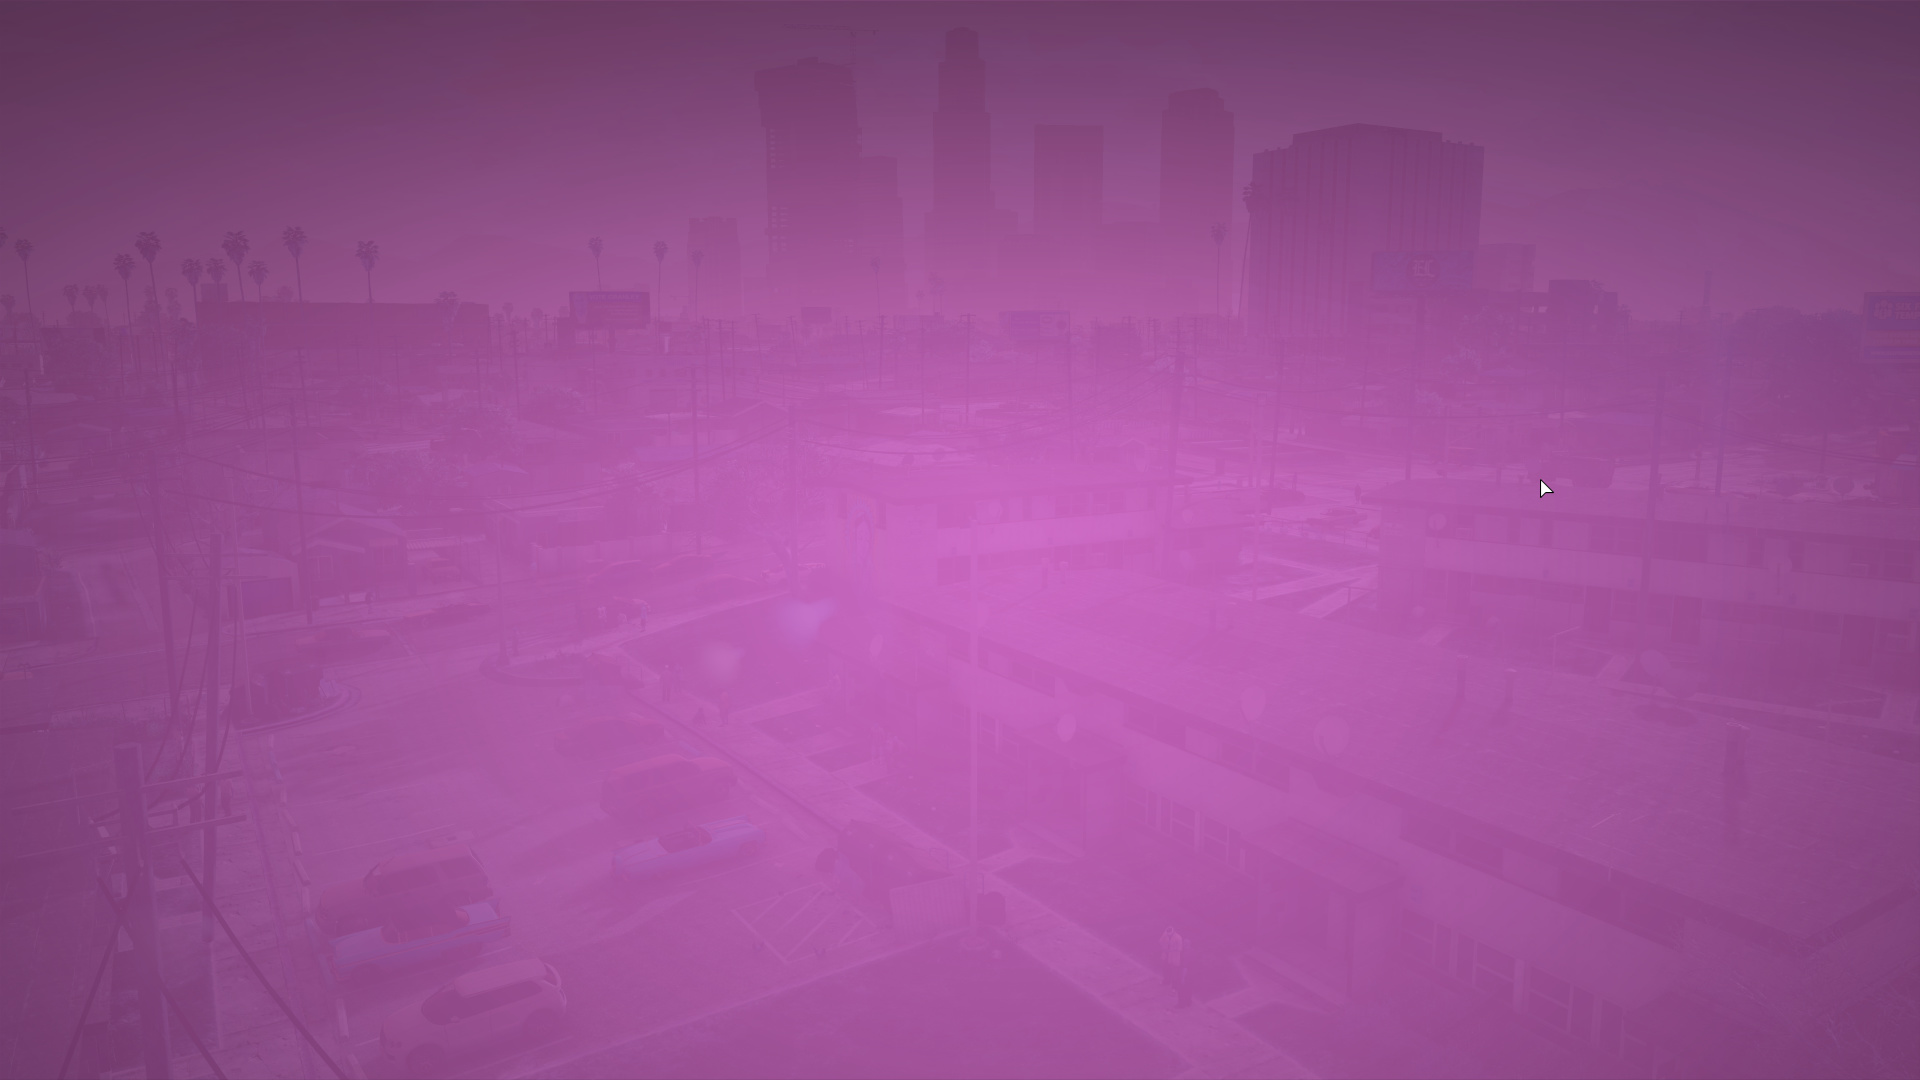 Vice City Wallpapers 73 images